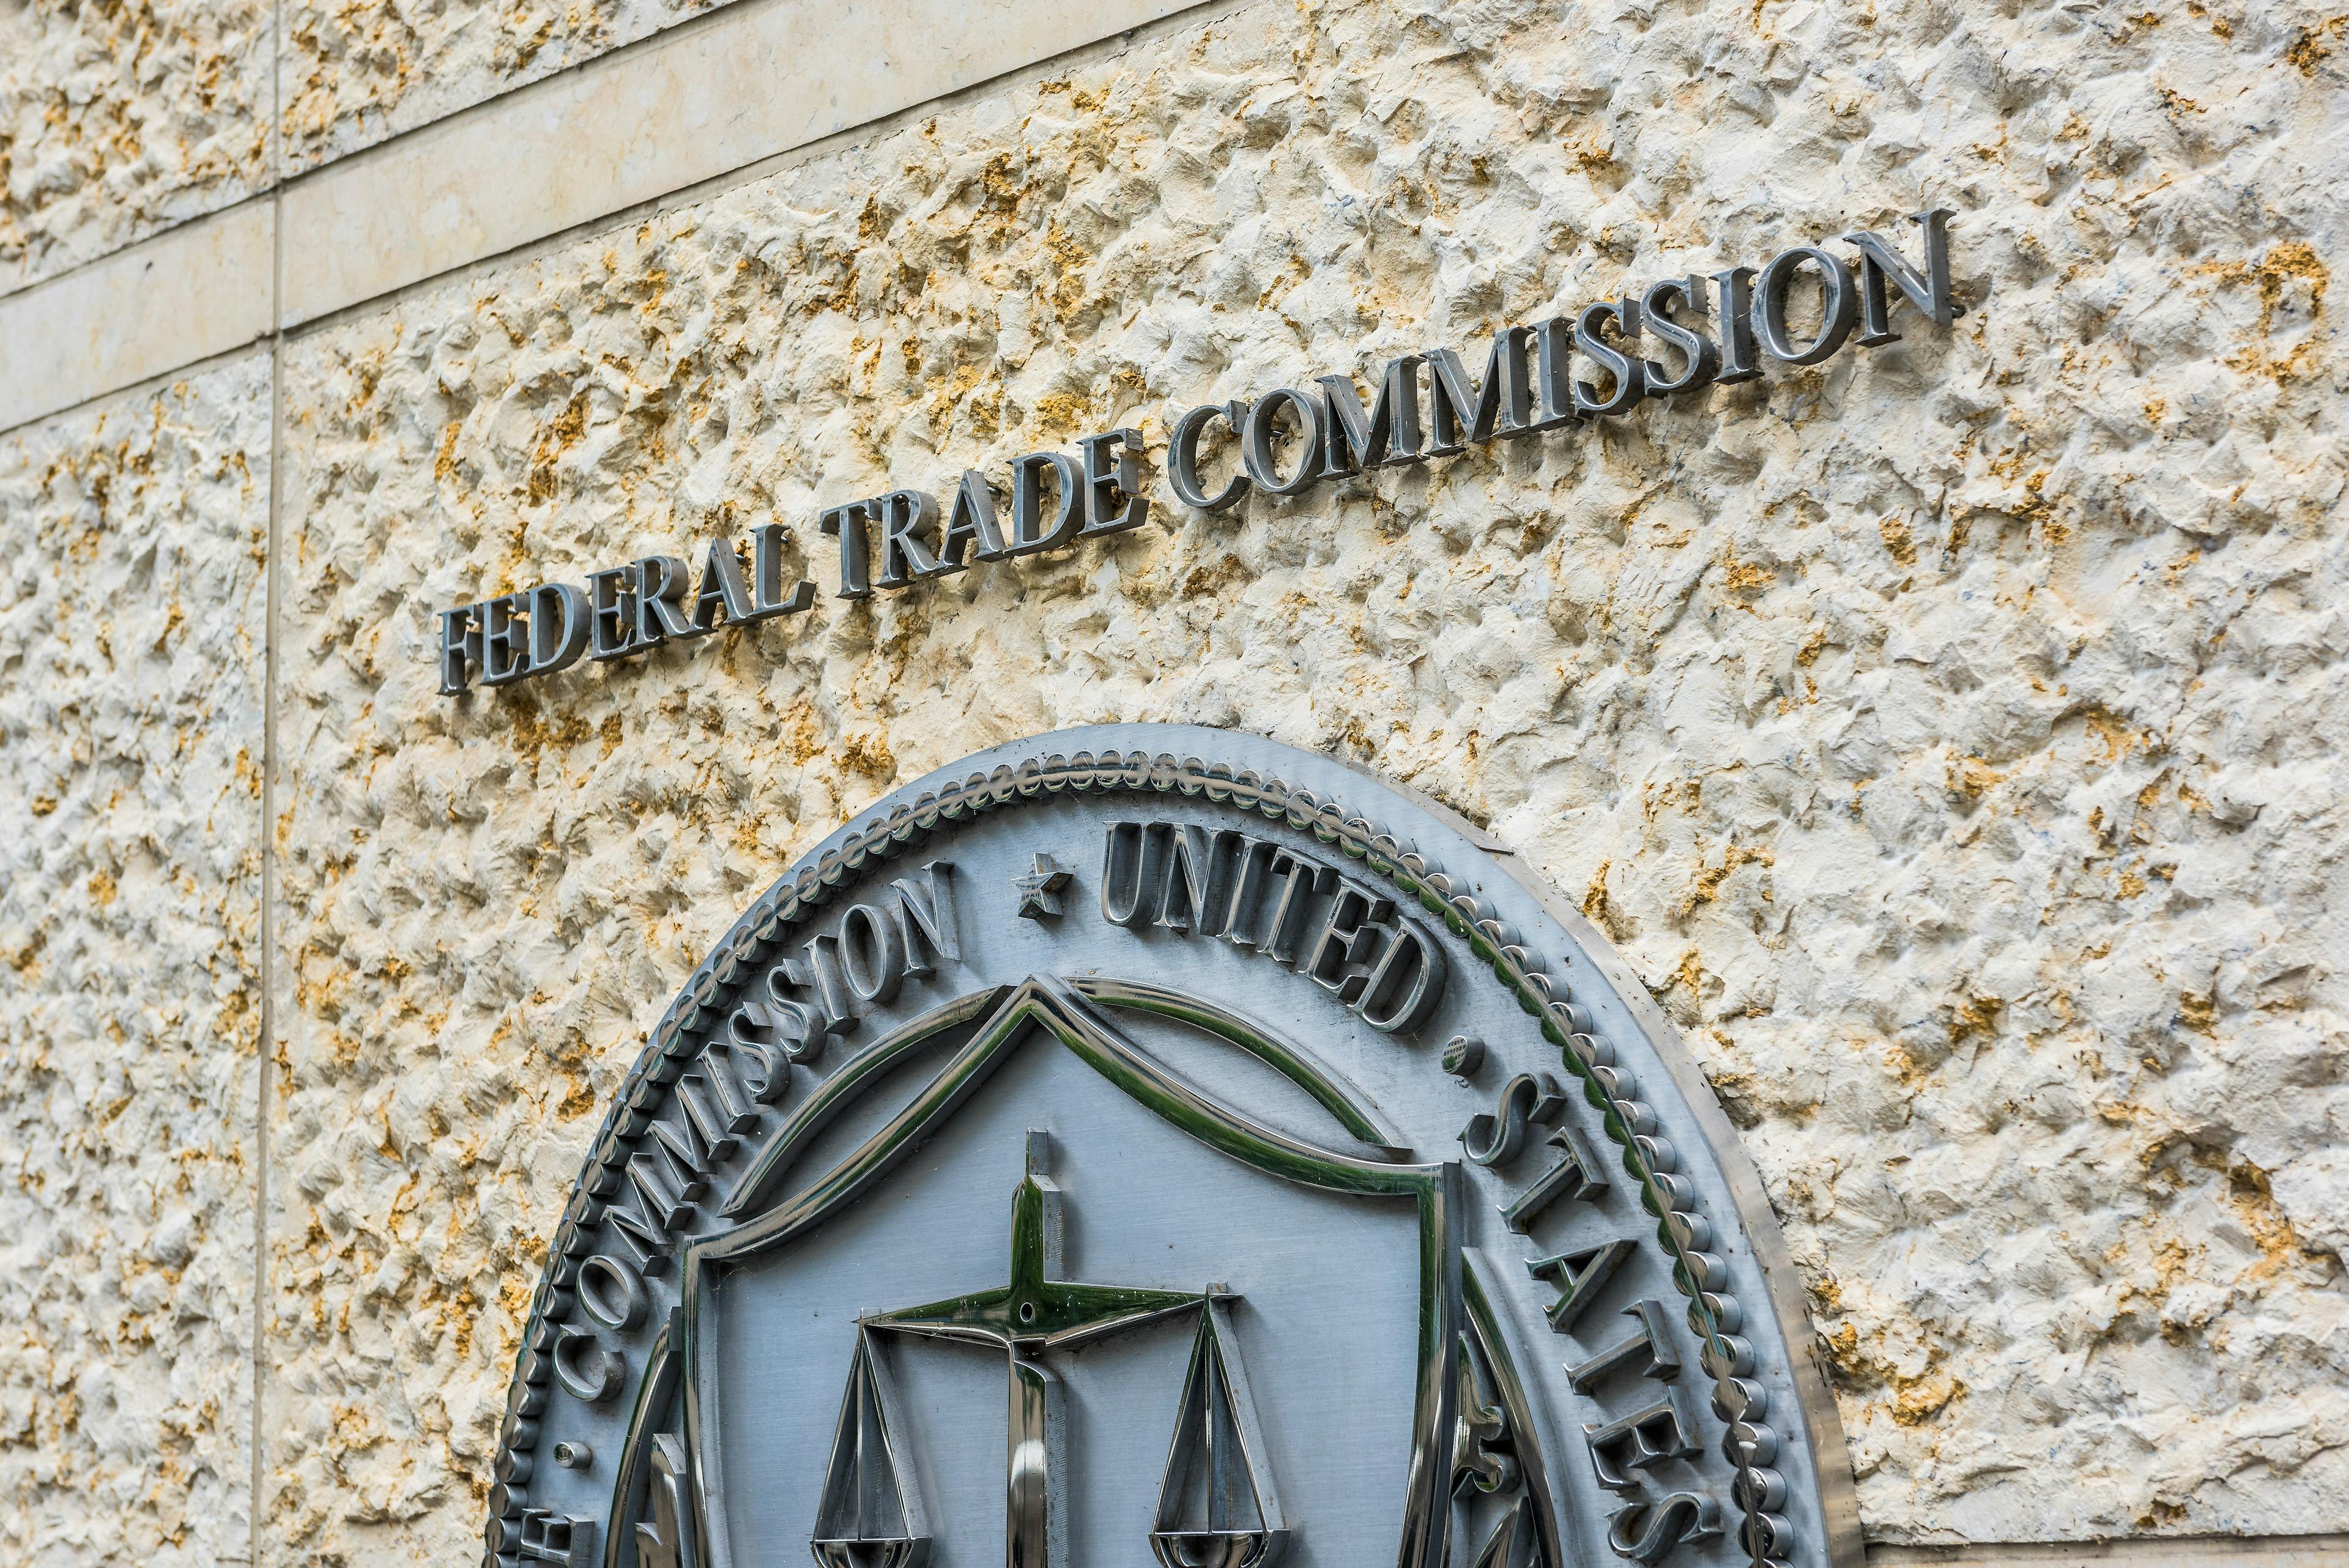 Exterior photo of the sign outside the Federal Trade Commission